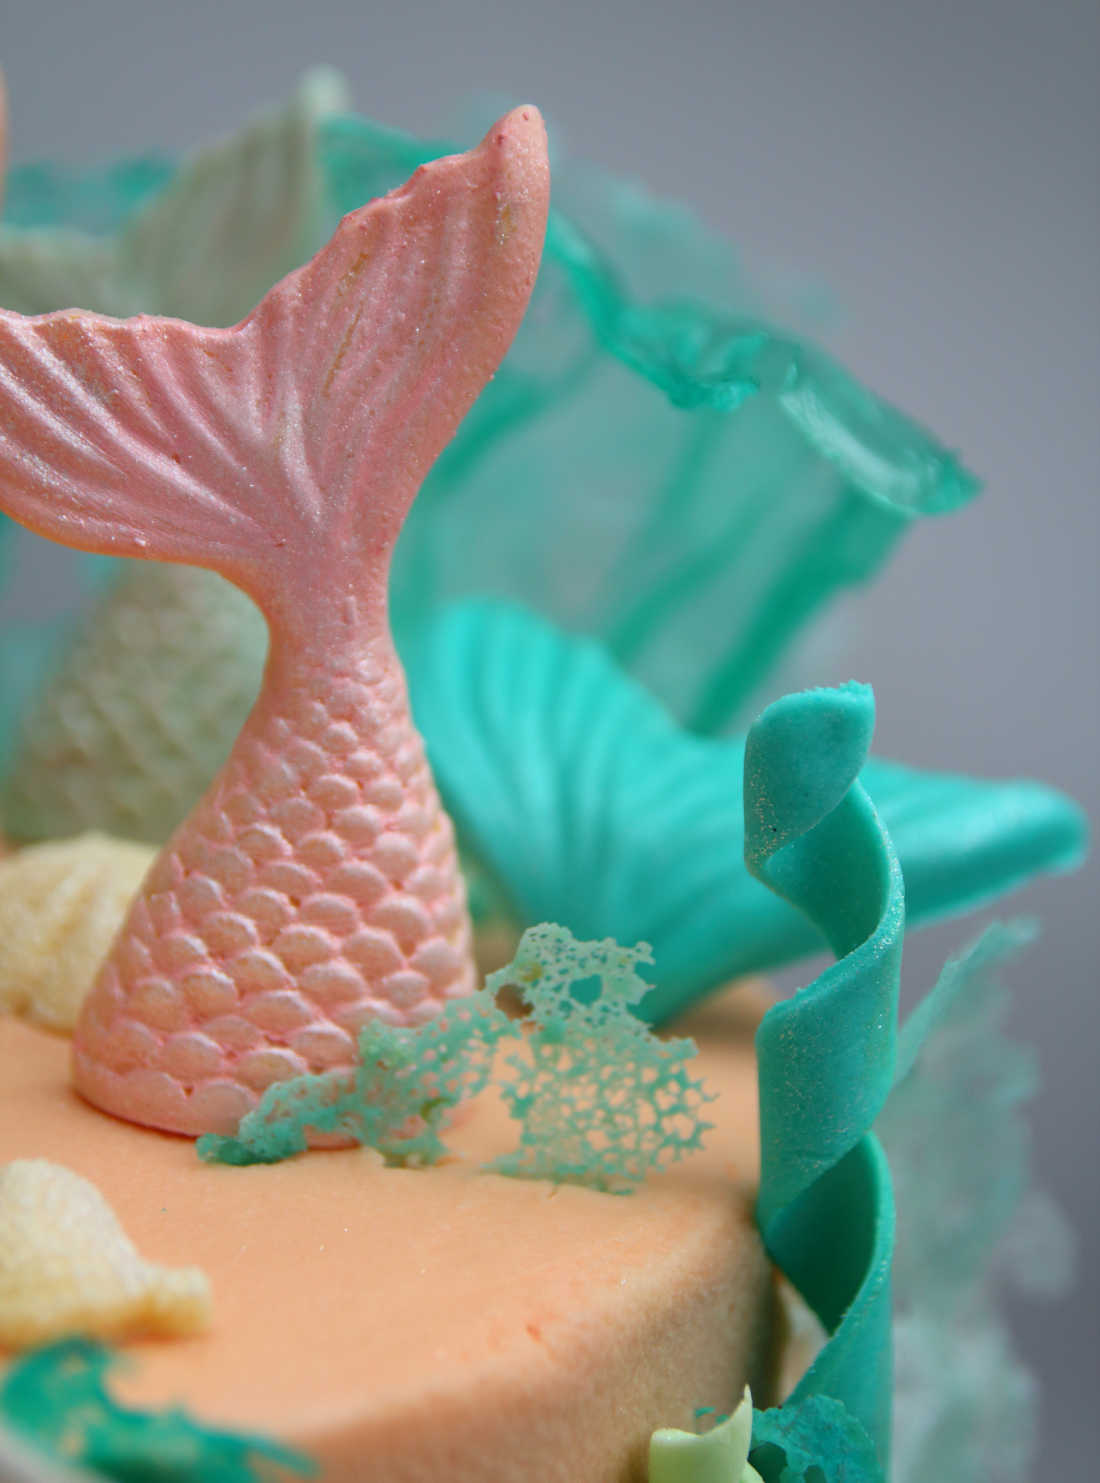 Seaweed from fondant icing on a sea cake